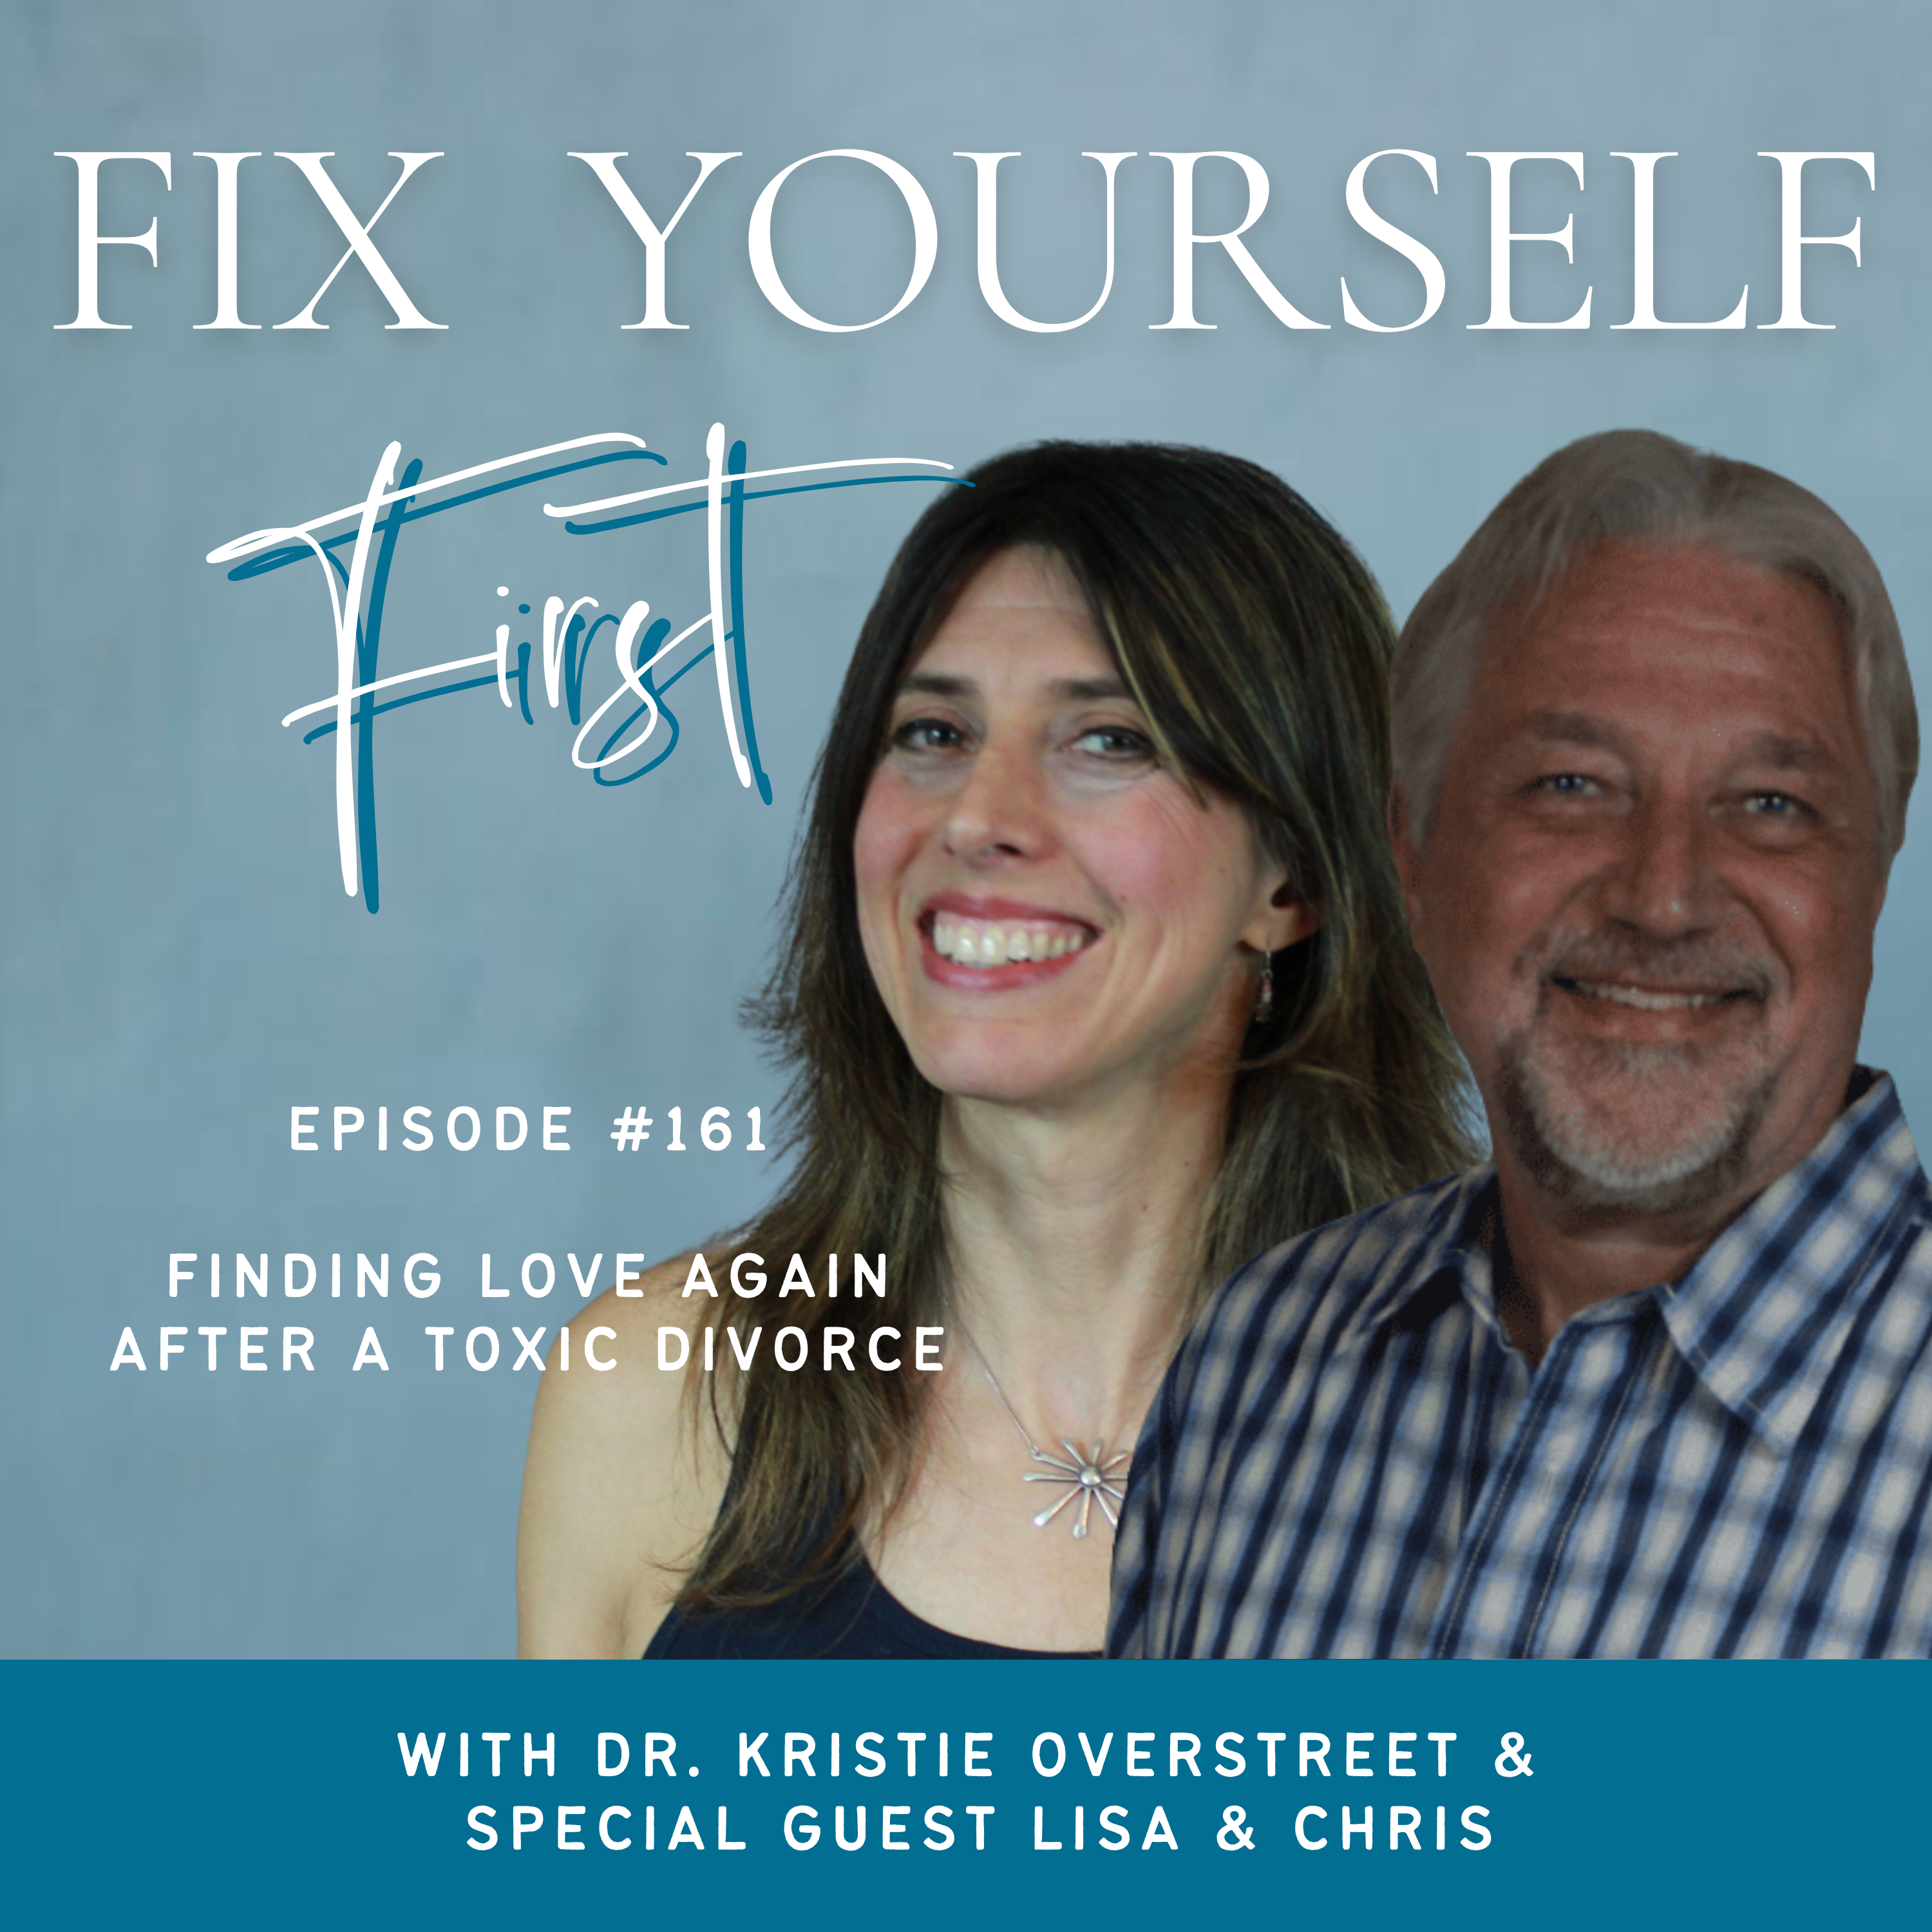 Fix Yourself First Episode 161 Finding Love Again After a Toxic Divorce with Lisa & Chris